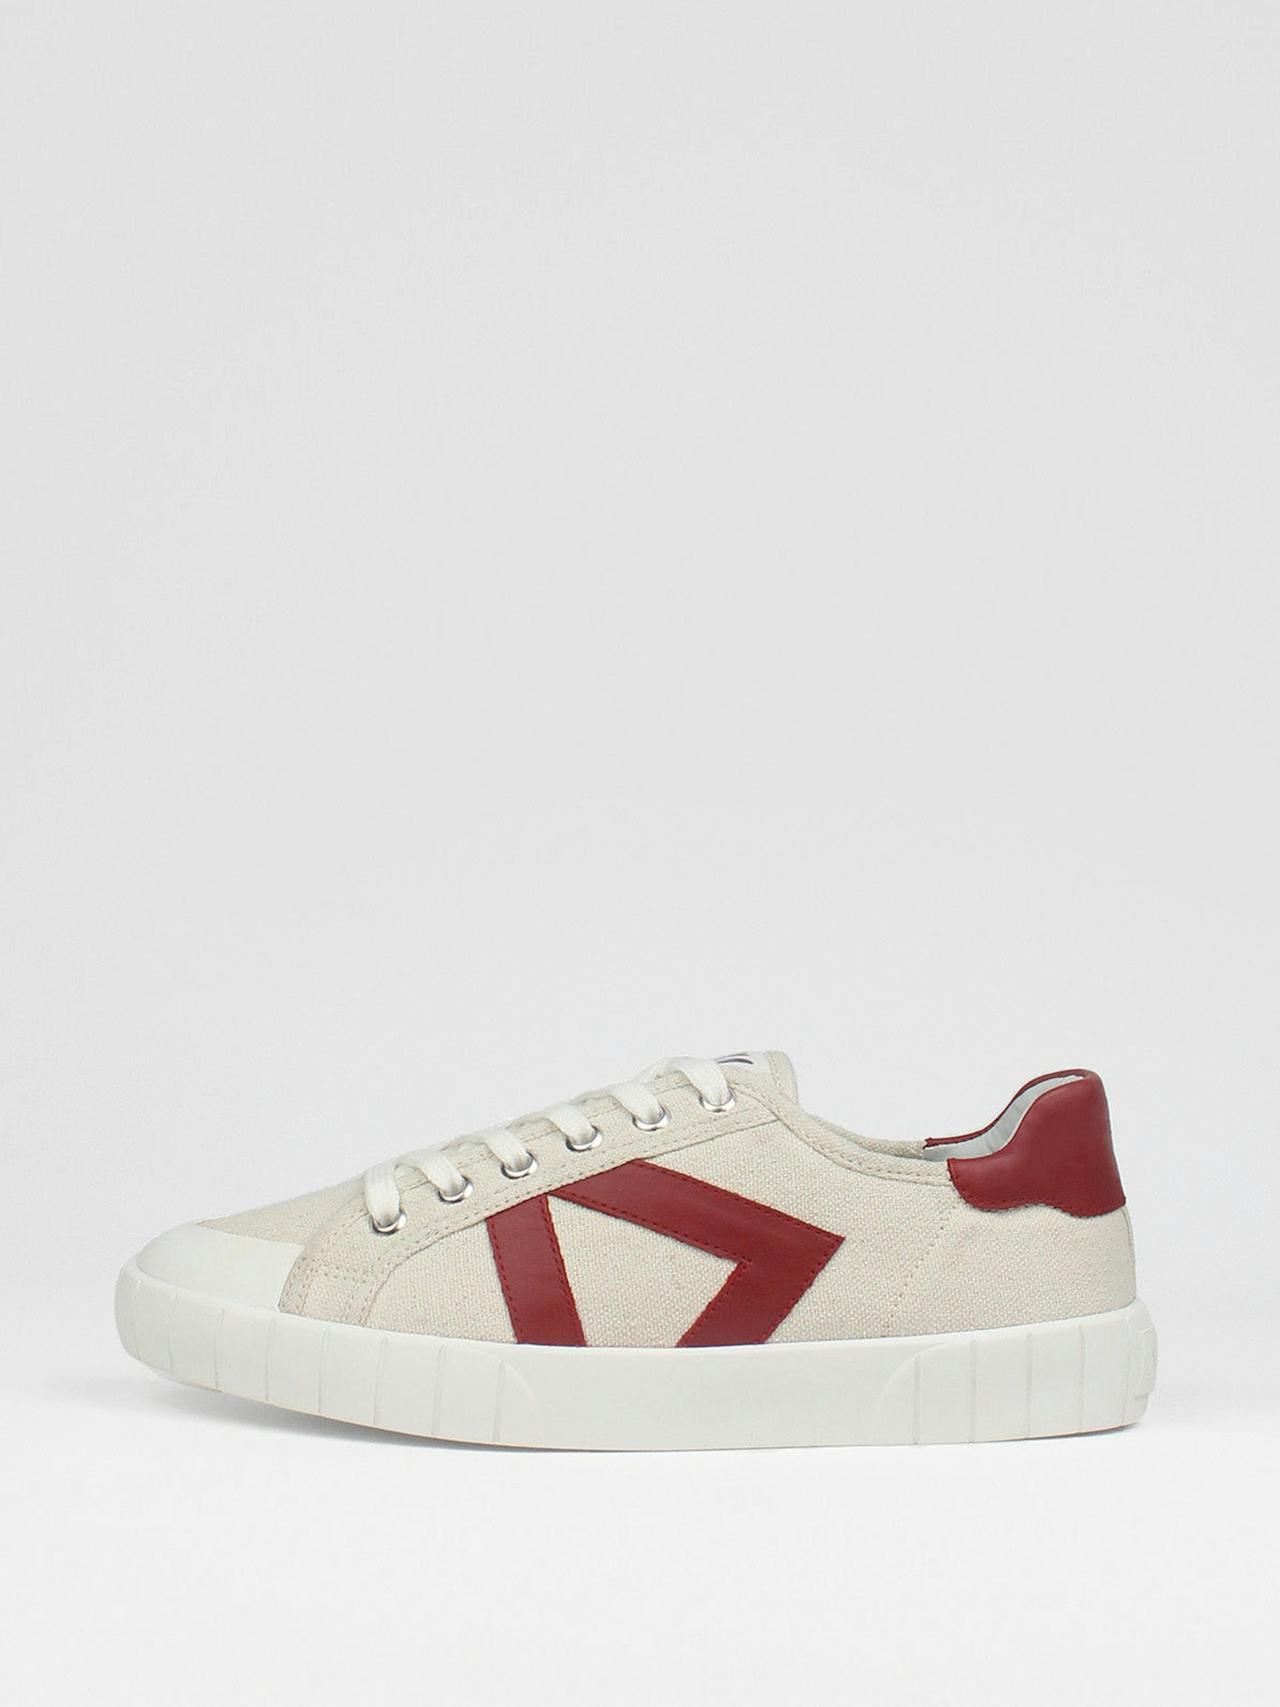 The Helios beige and red trainers